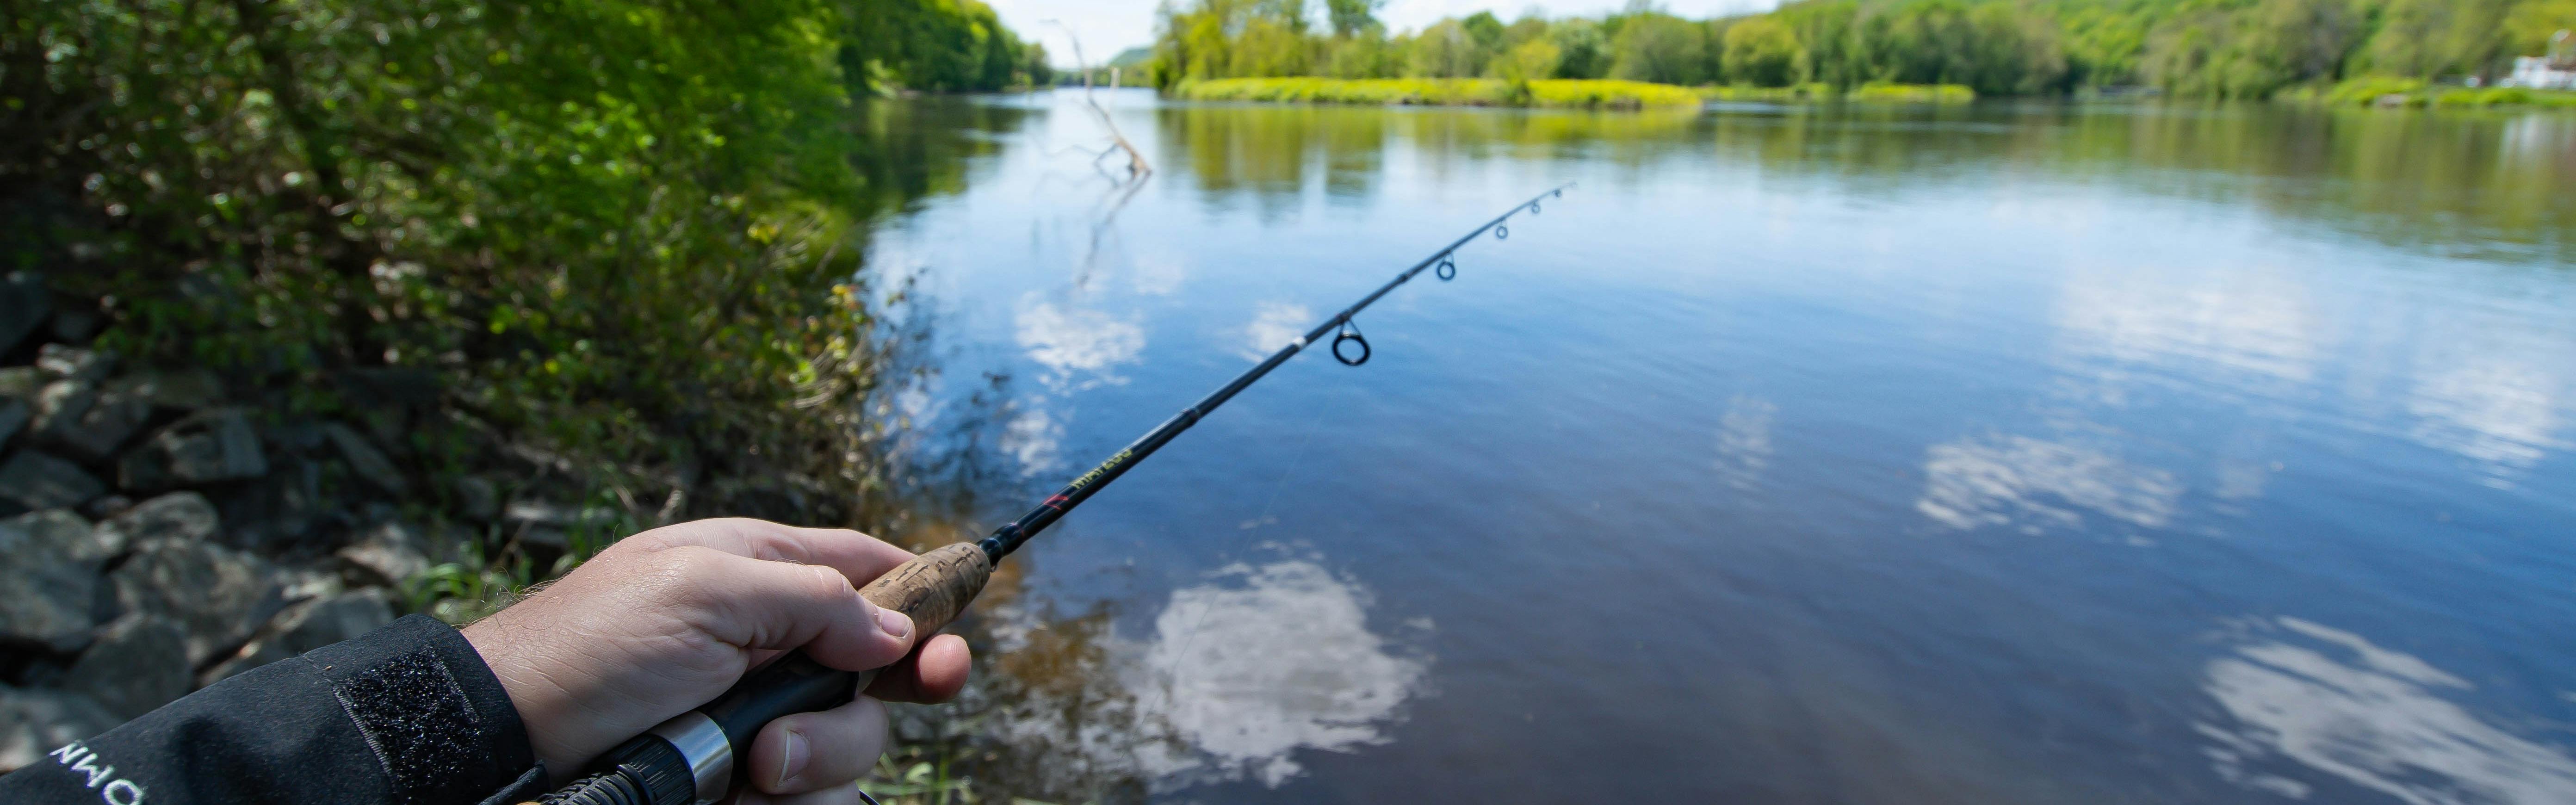 Your Guide to Flipping, Pitching, and Punching for Bass in Thick Cover